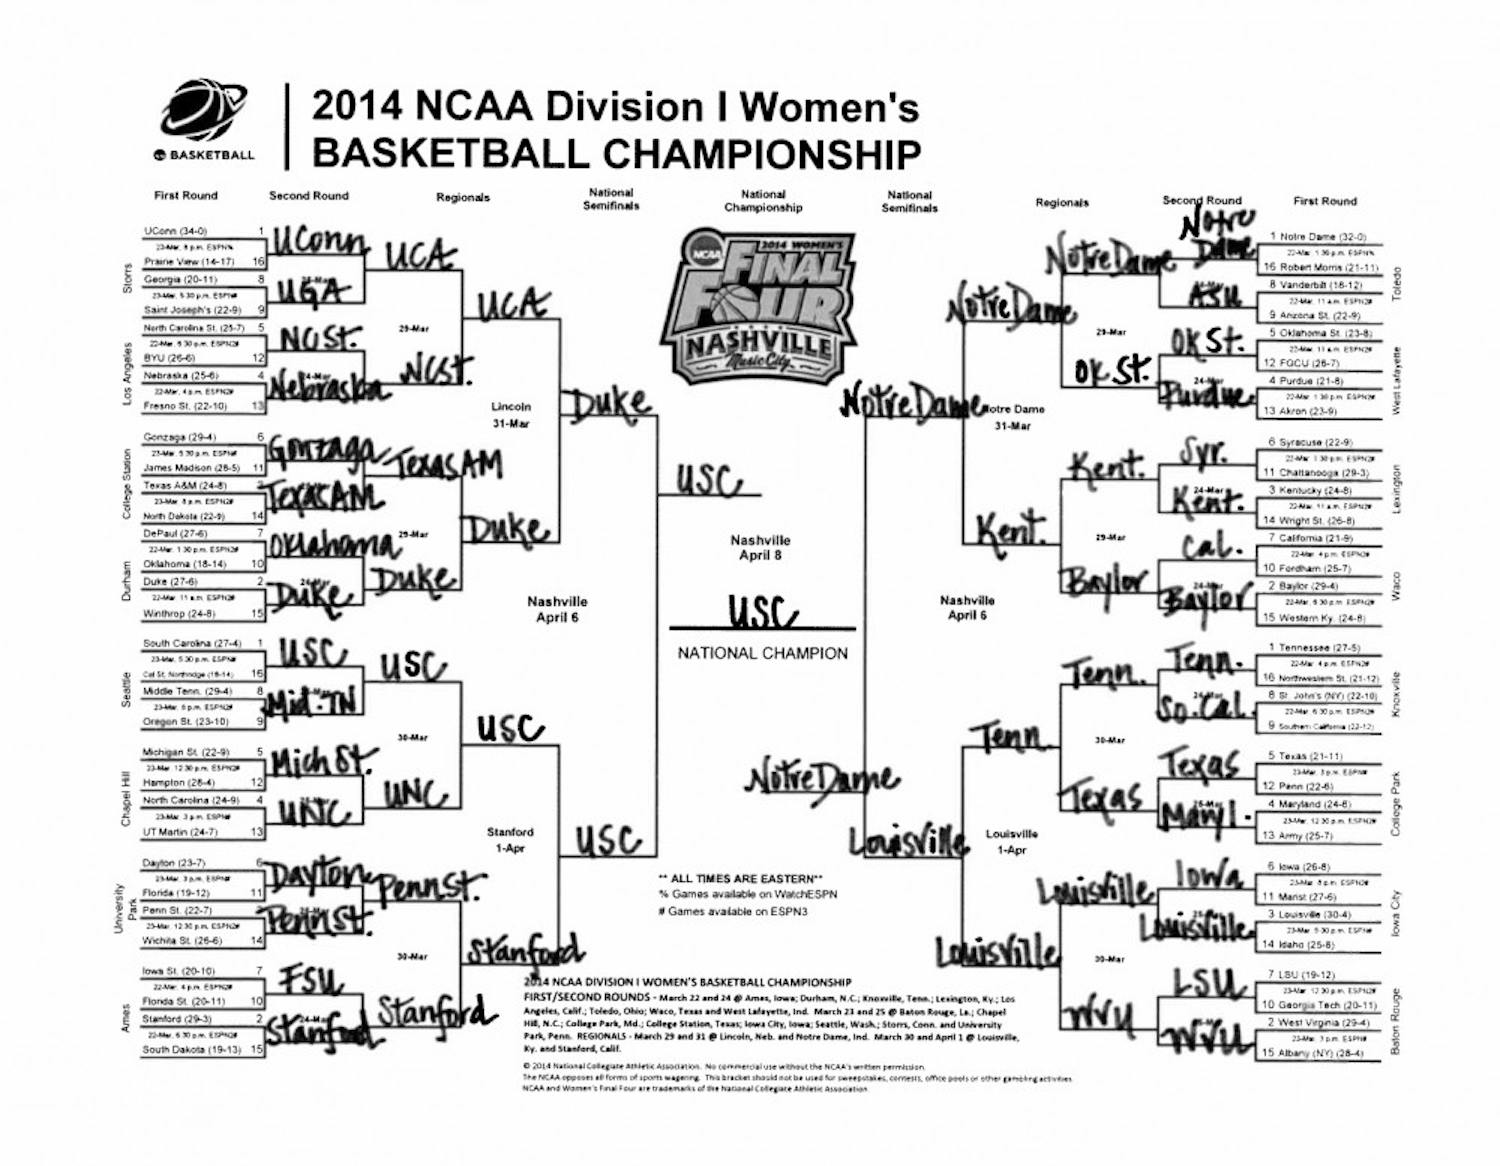 	Gov. Nikki Haley, USC President Harris Pastides, Athletics Director Ray Tanner and others share their brackets for the 2014 NCAA women&#8217;s basketball tournament.